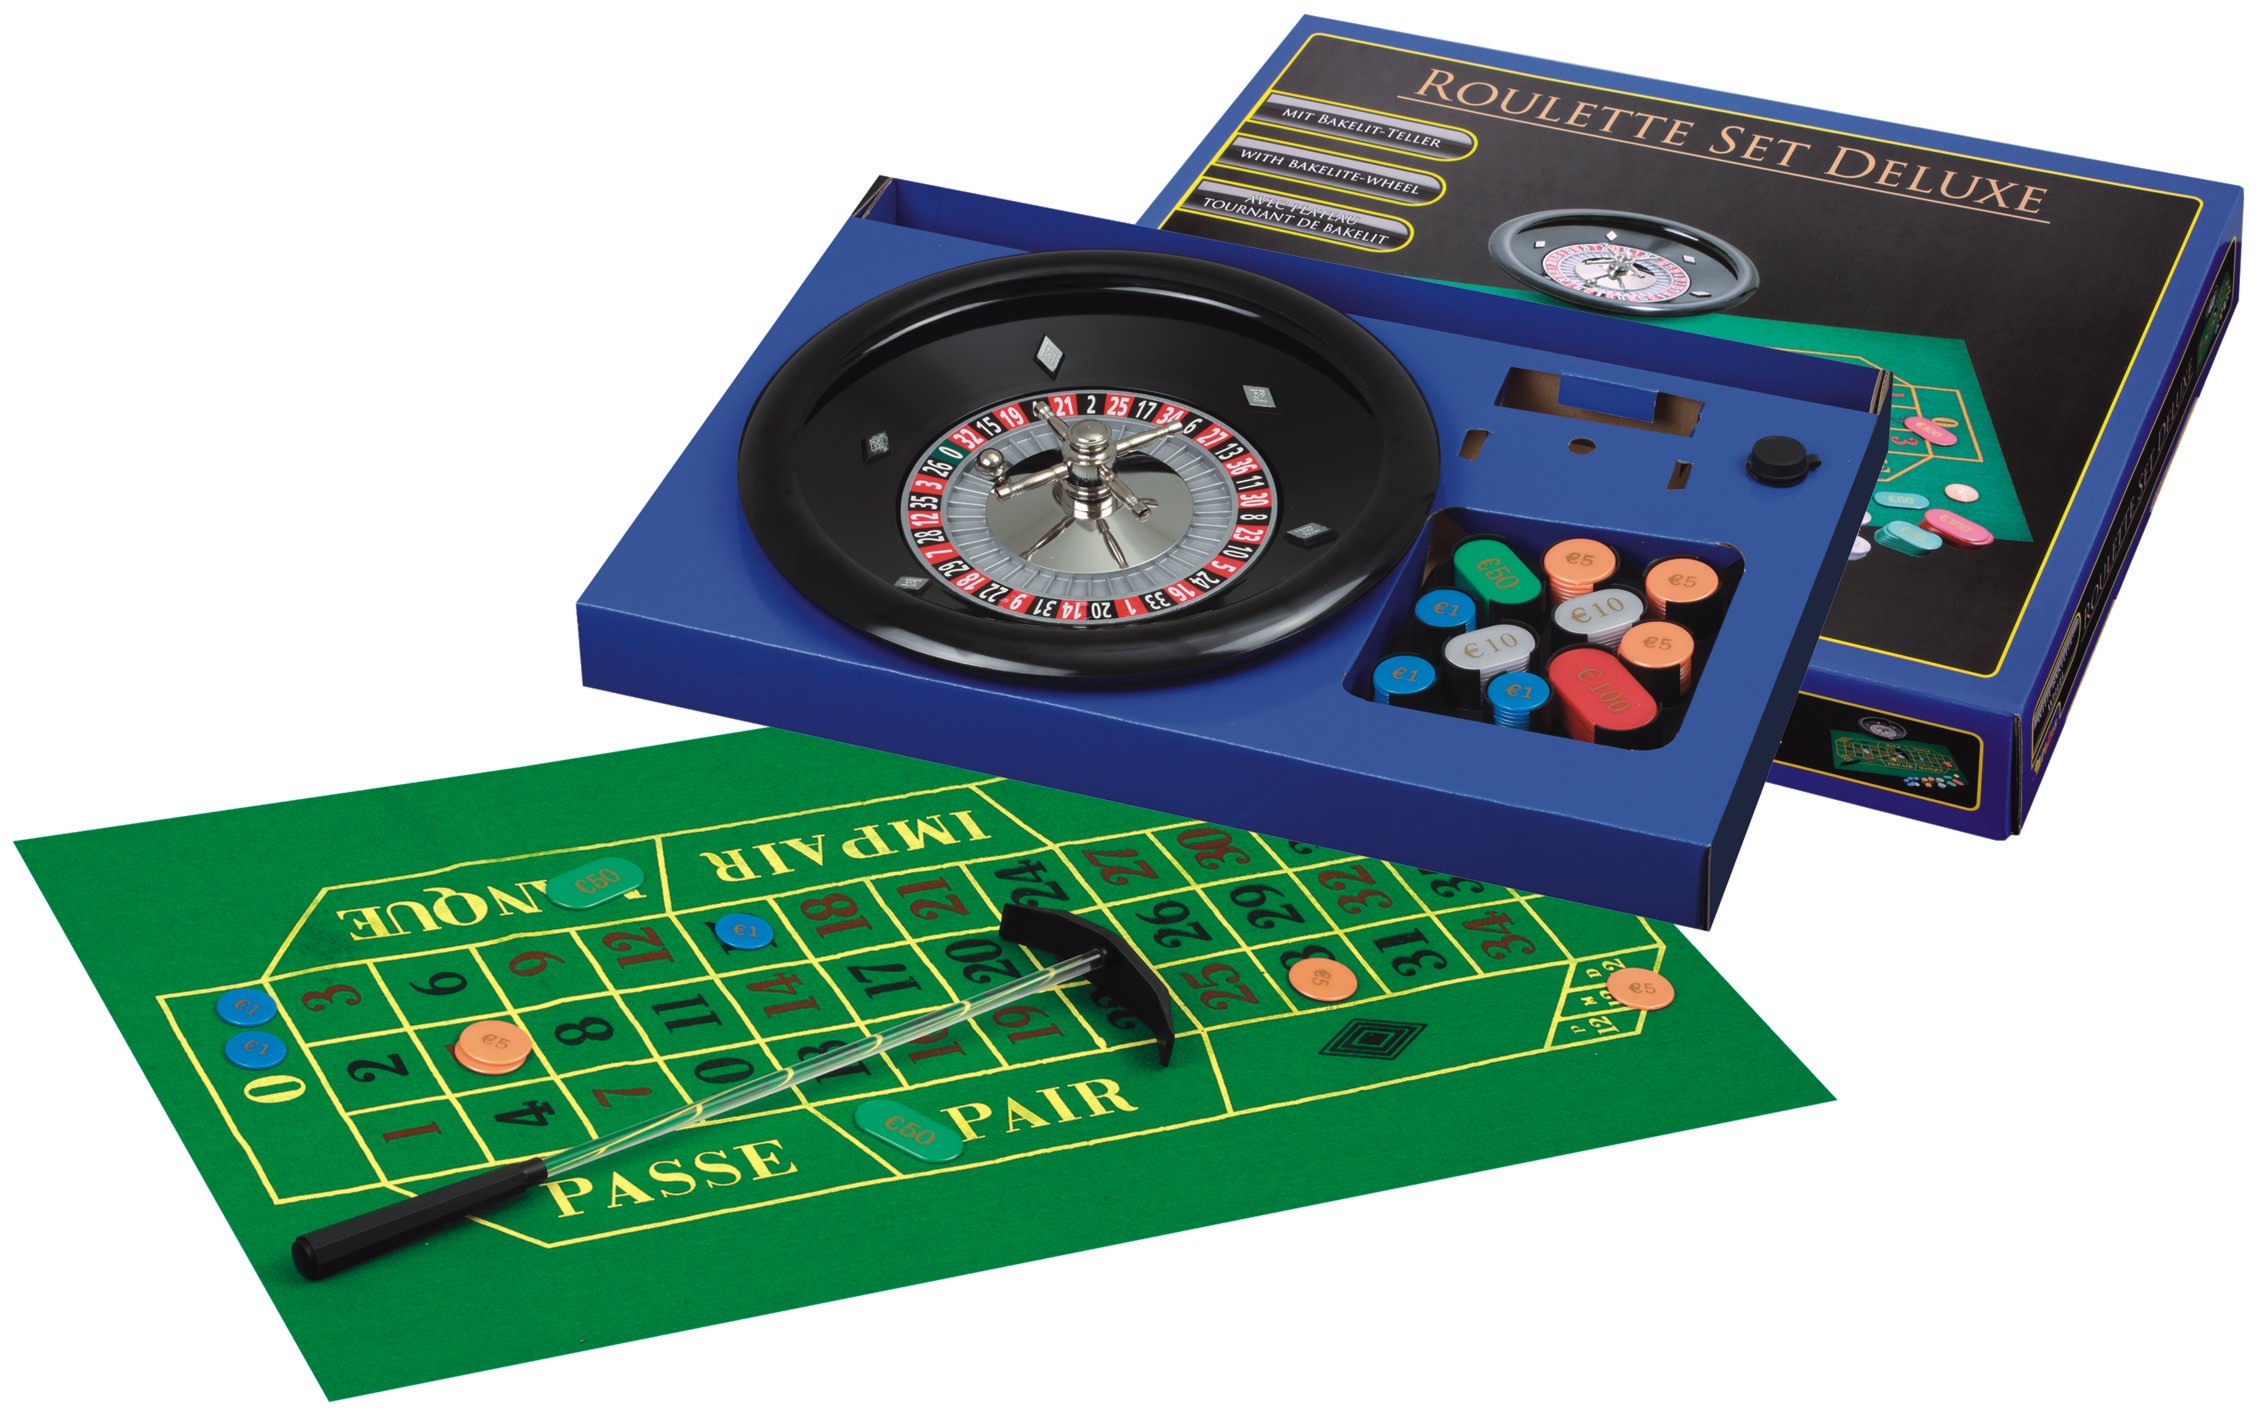 Roulette set luxe